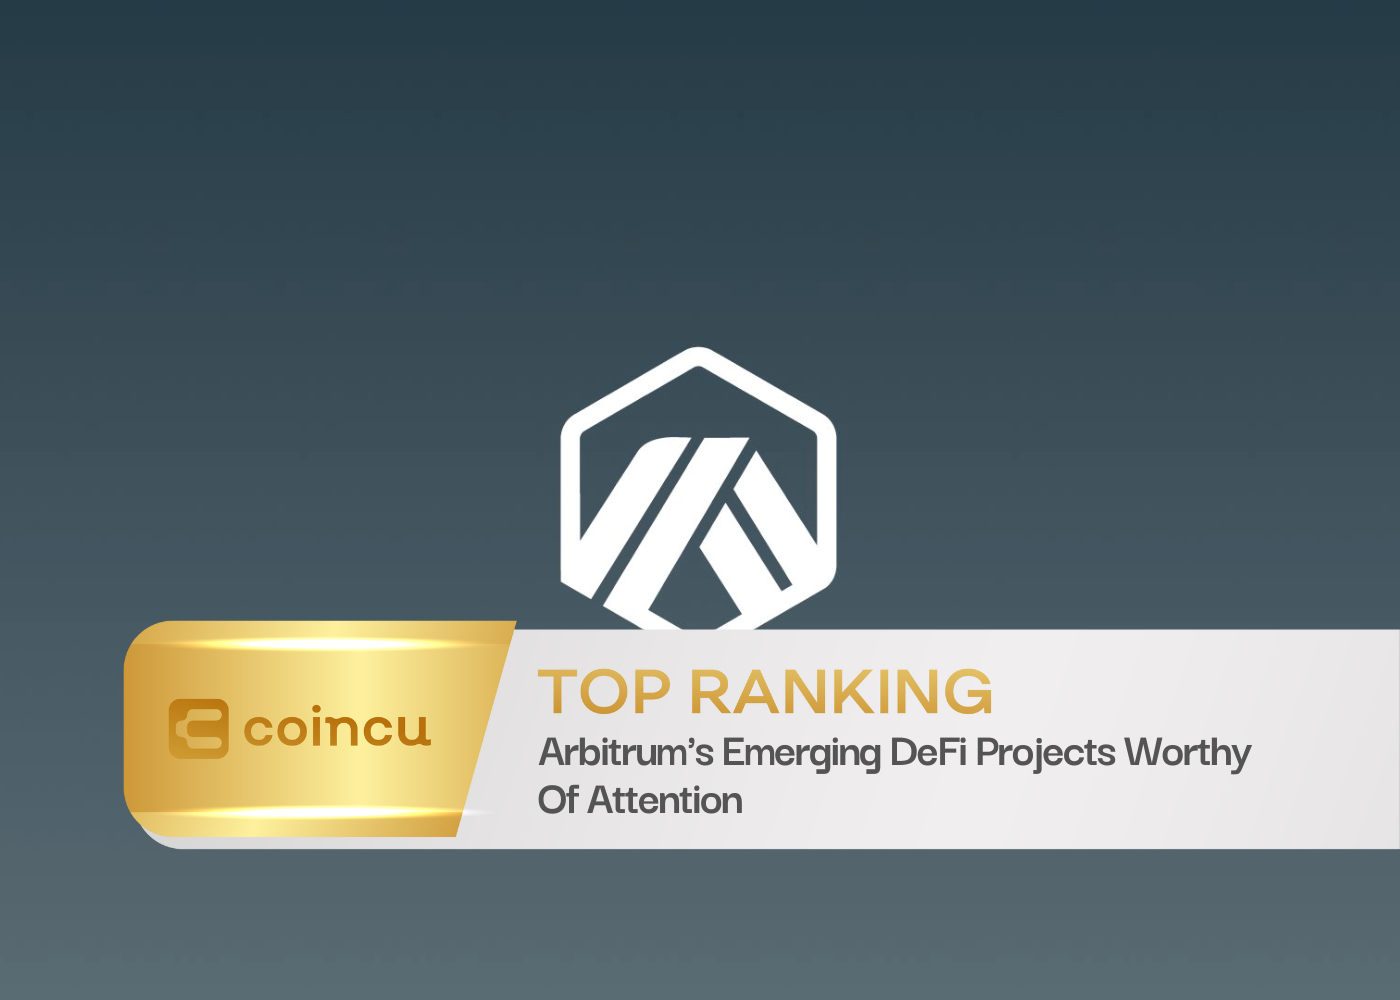 Arbitrum's Emerging DeFi Projects Worthy Of Attention